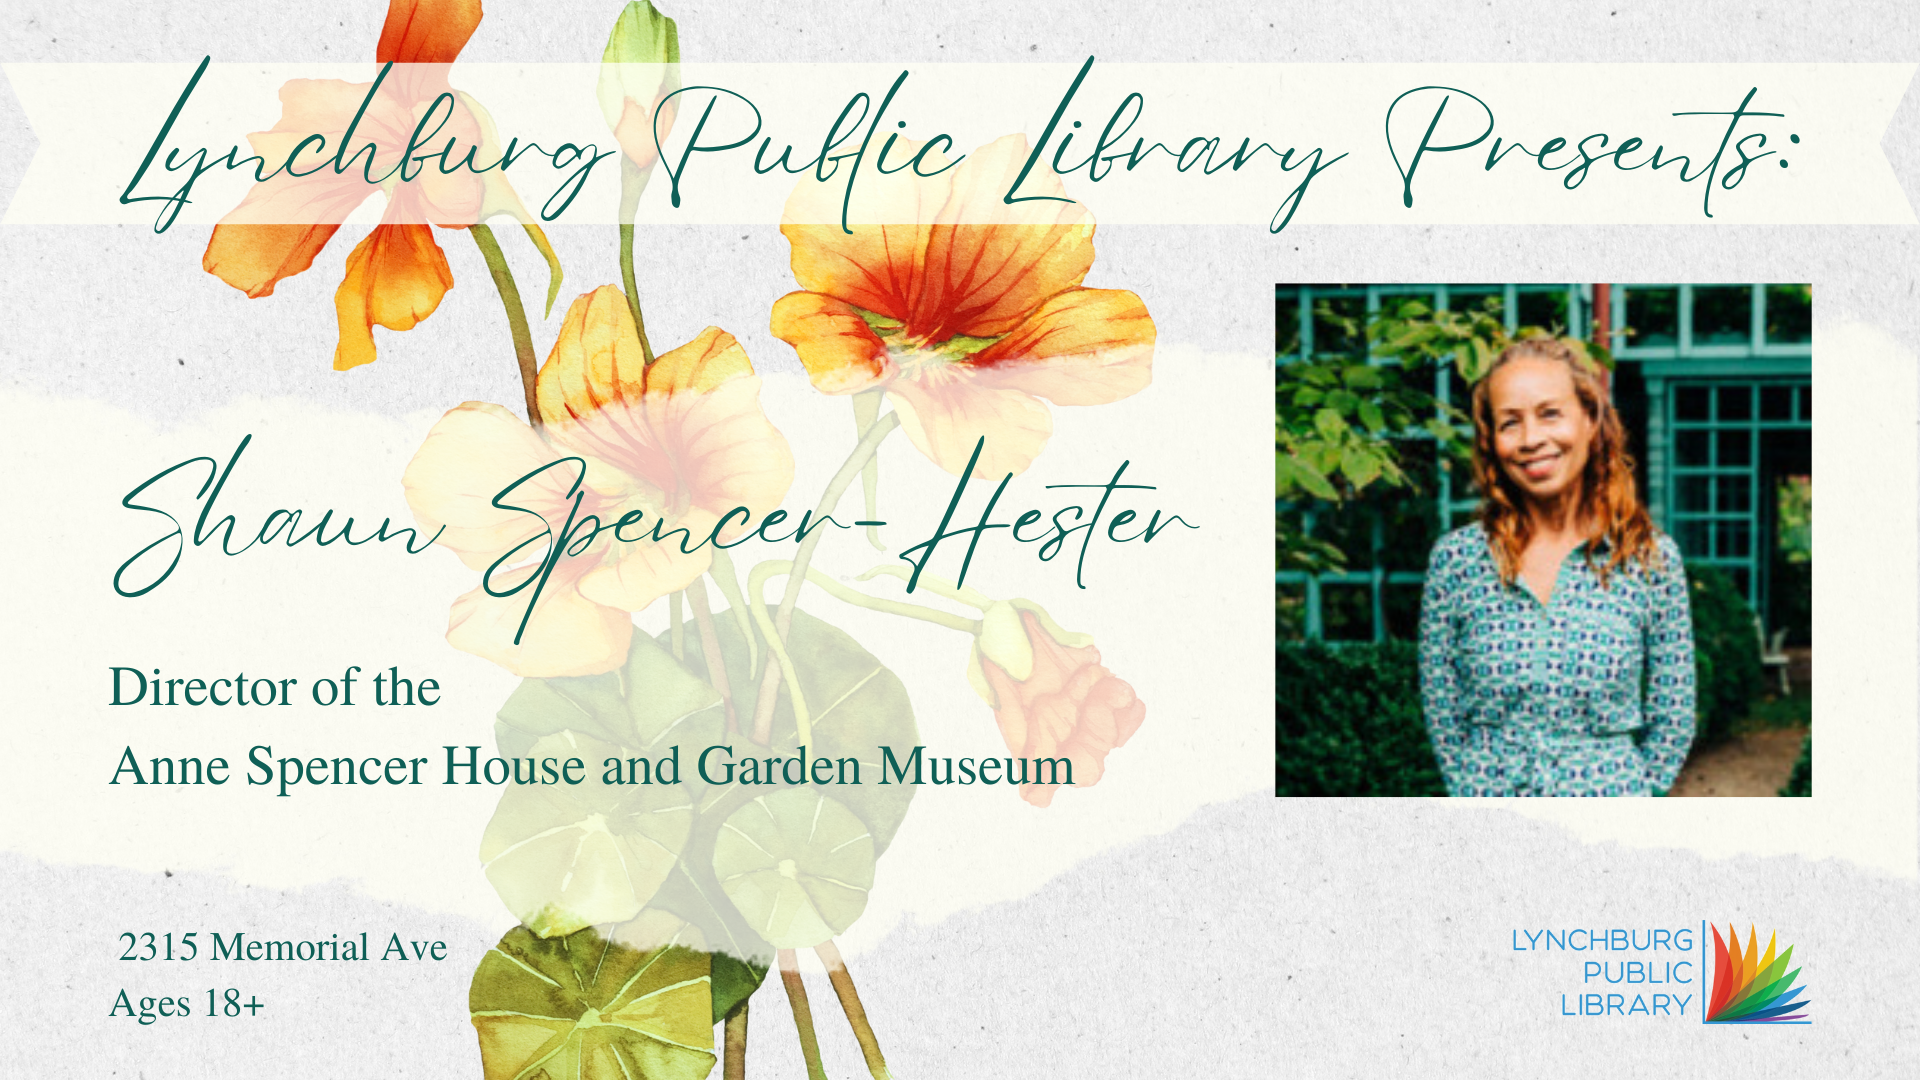 Lynchburg Public Library Presents: Shaun Spencer-Hester; Director of the Anne Spencer House and Garden Museum; 2315 Memorial Ave; Ages 18+